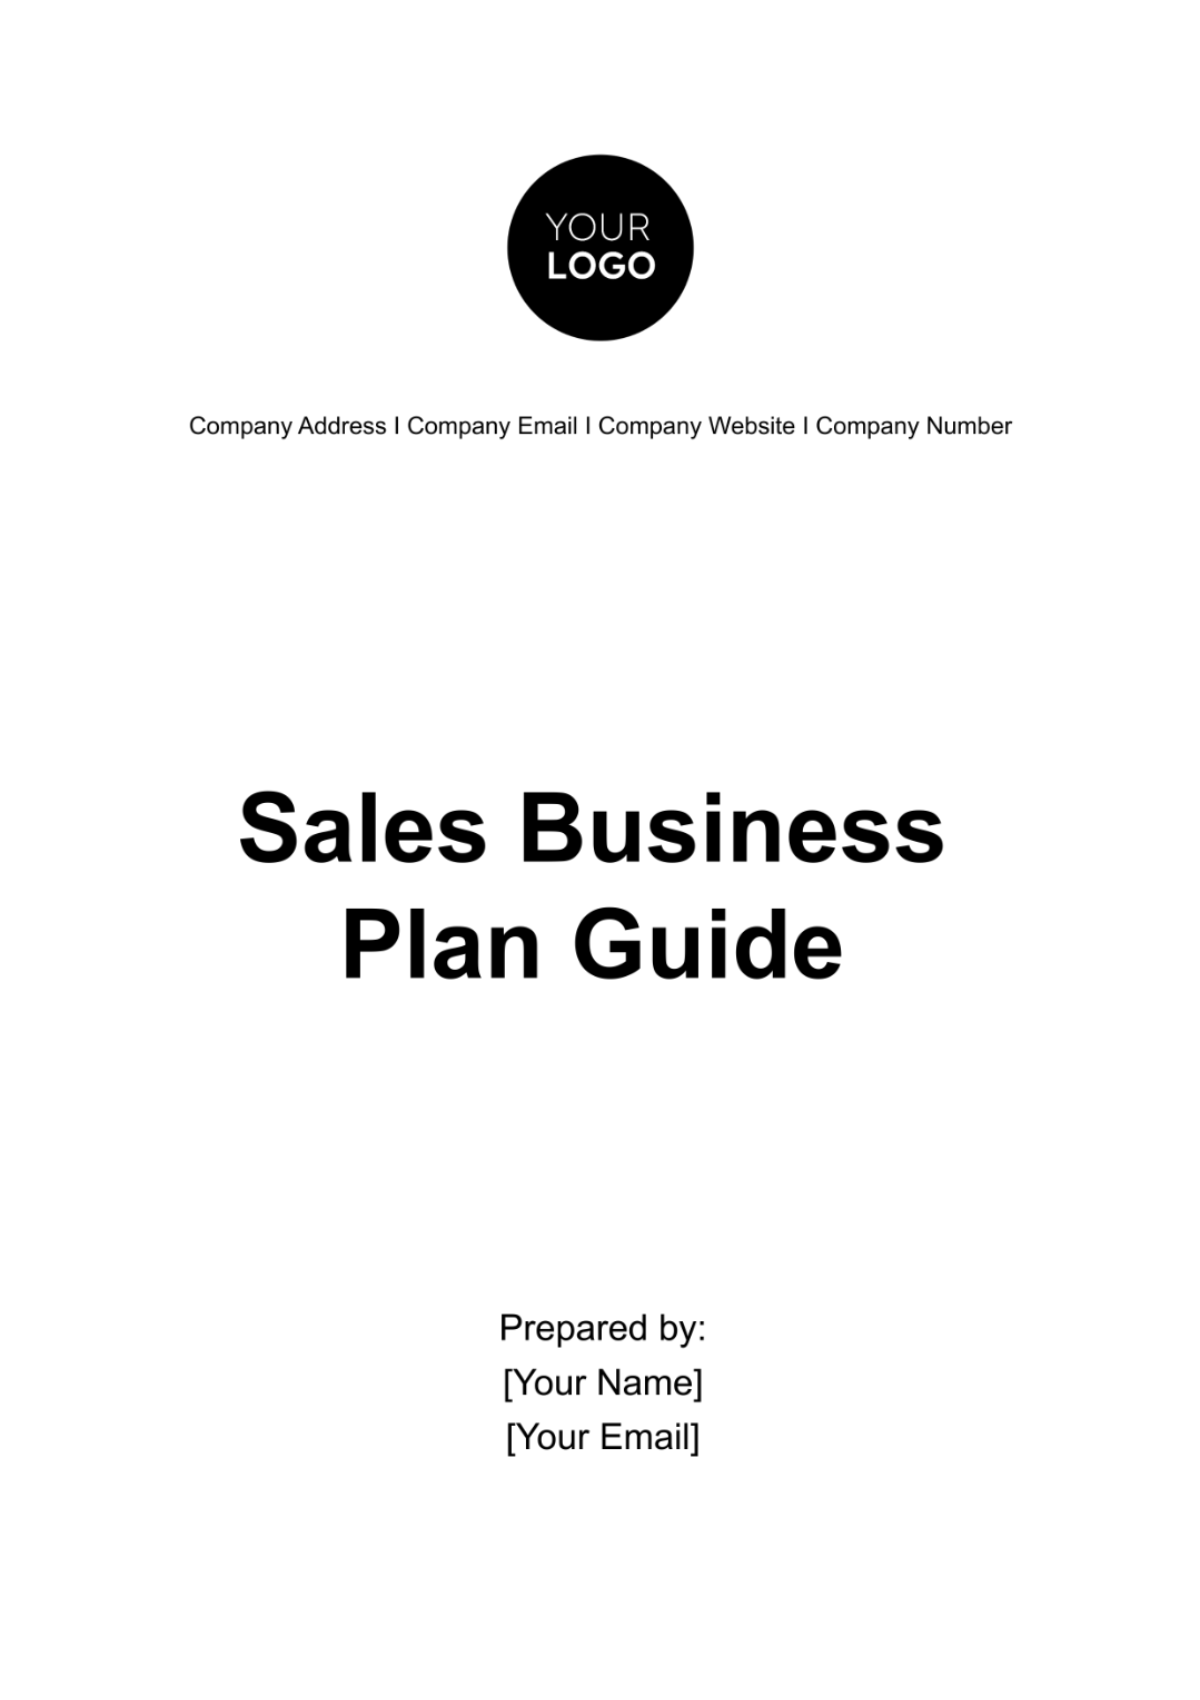 Sales Business Plan Guide Template